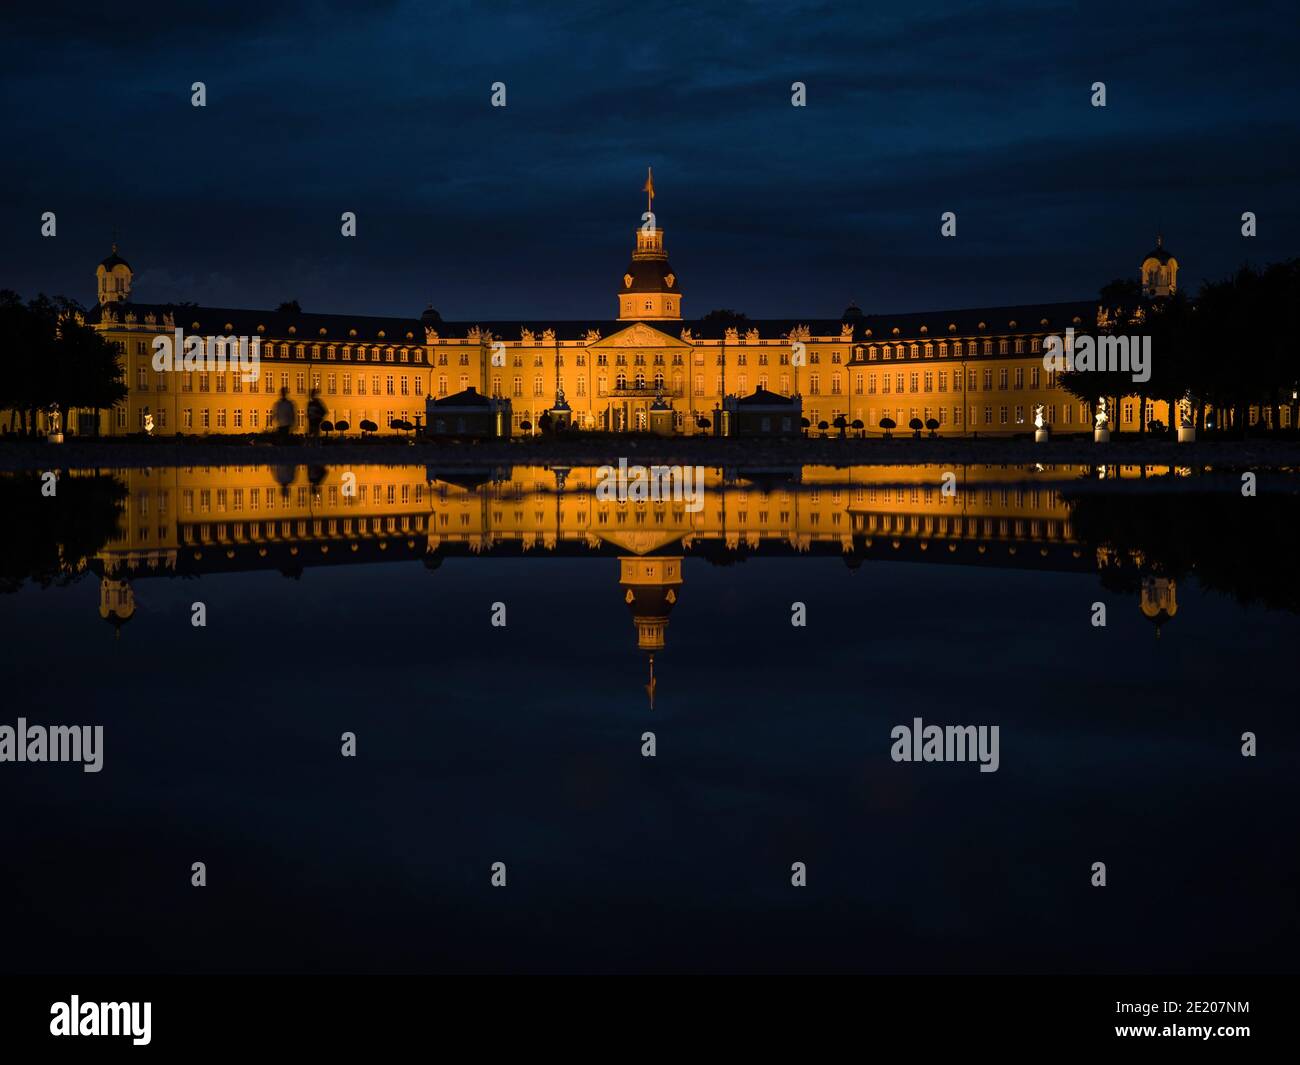 Panorama night reflection of illuminated yellow stone Schloss Karlsruhe Castle Palace Schlosspark in Baden Wurttemberg Germany in Europe Stock Photo